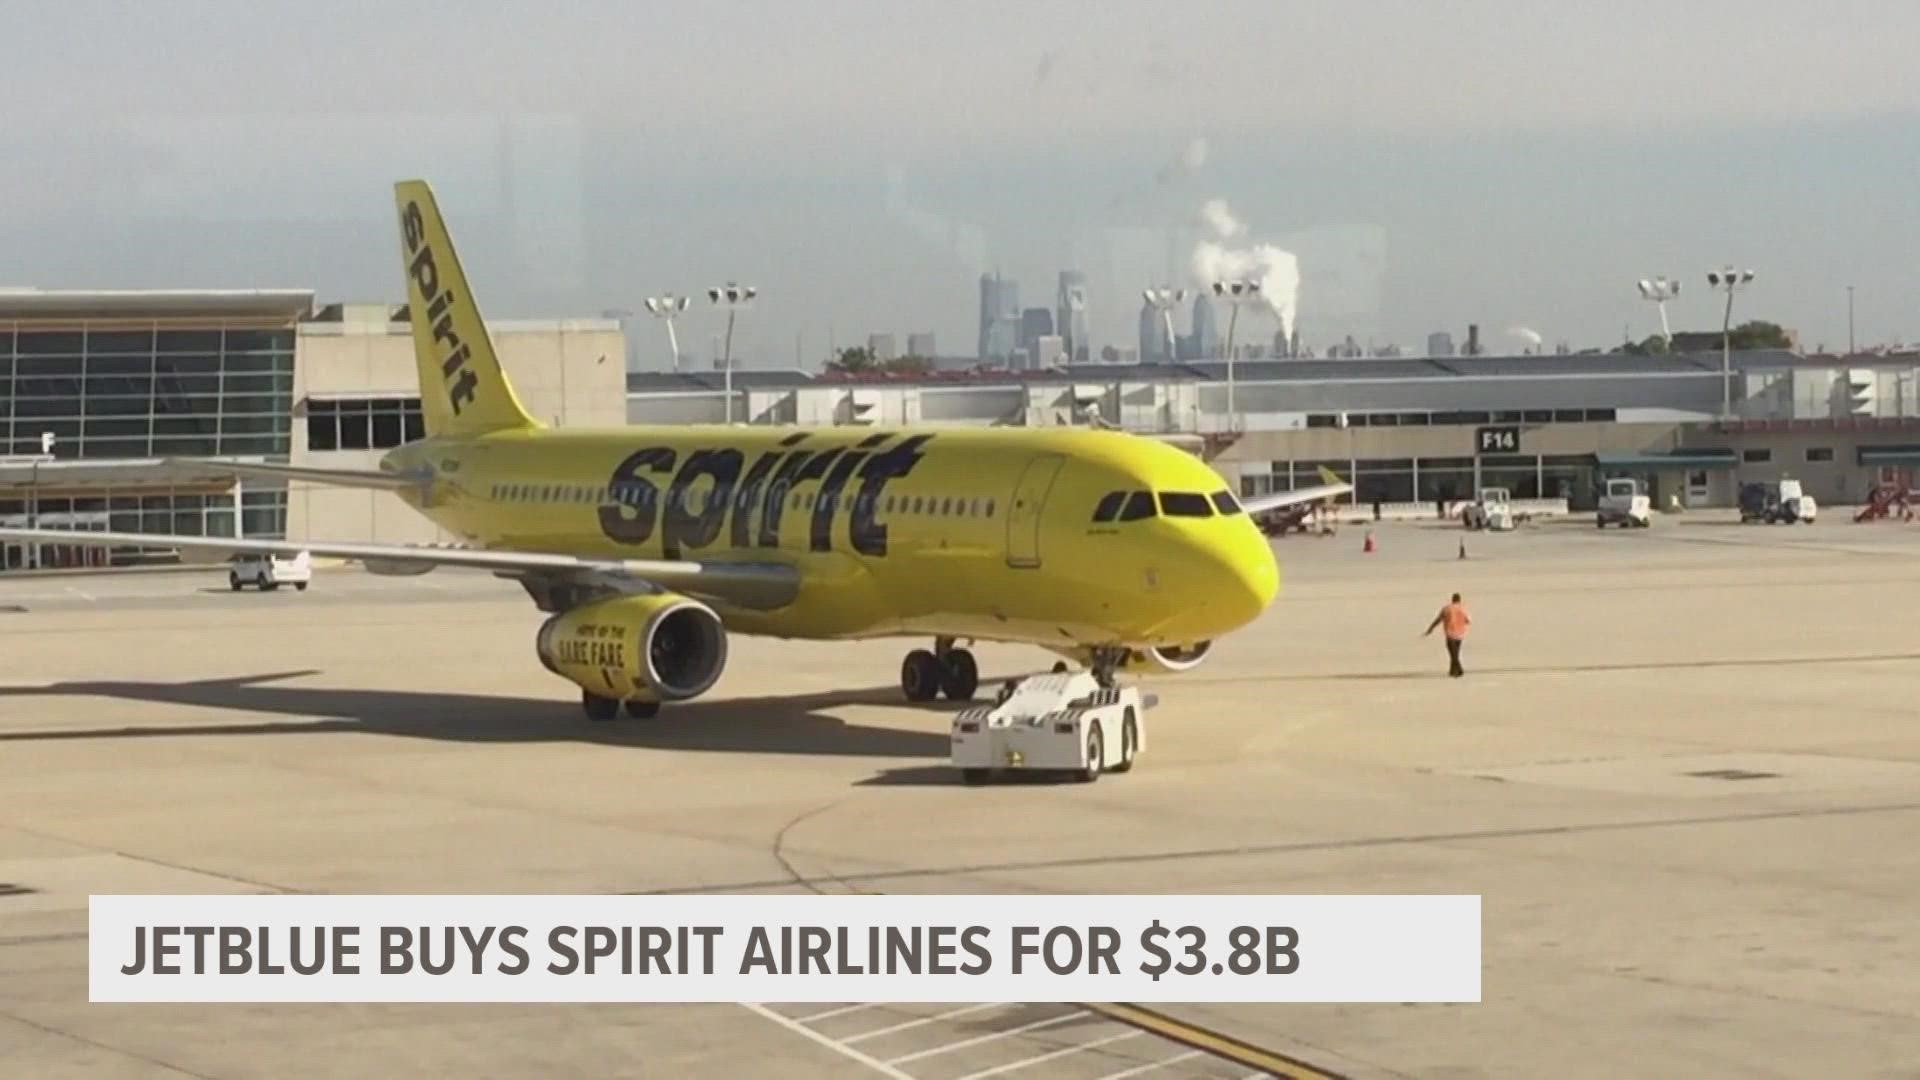 This comes a day after Spirit and Frontier Airlines agreed to abandon their merger proposal.